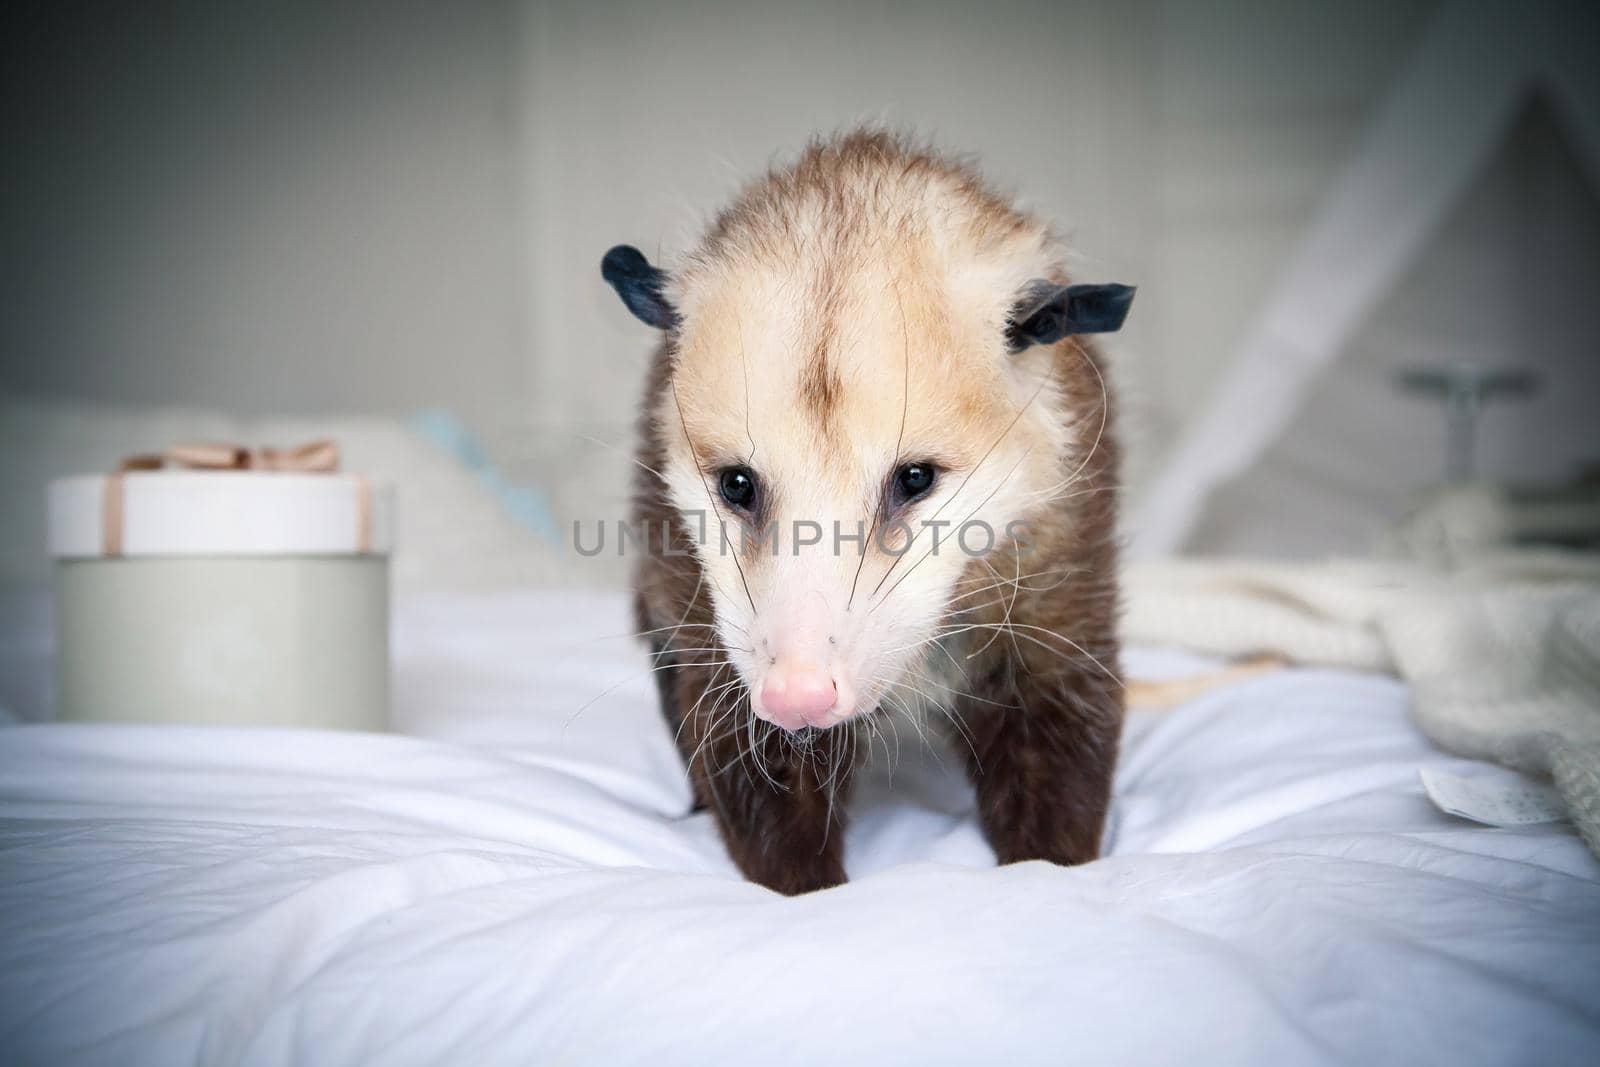 The Virginia or North American opossum, Didelphis virginiana, on bed